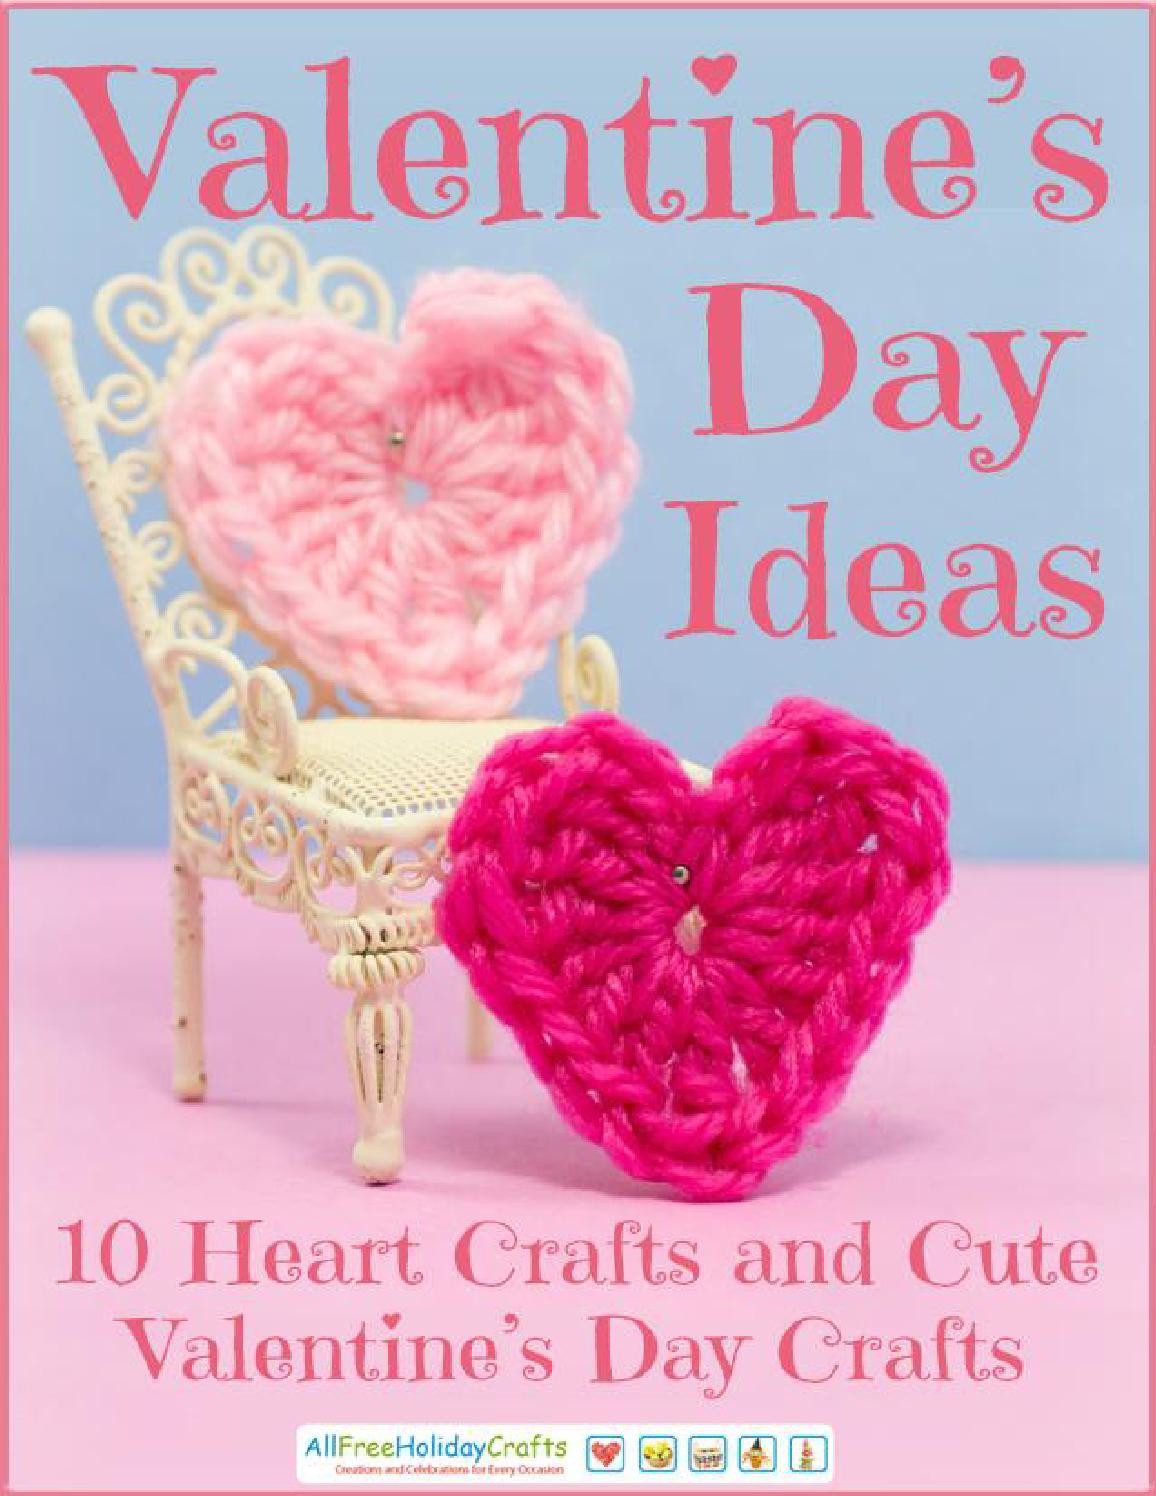 Cute Valentines Day Ideas
 Valentines day ideas heart crafts and cute valentines day